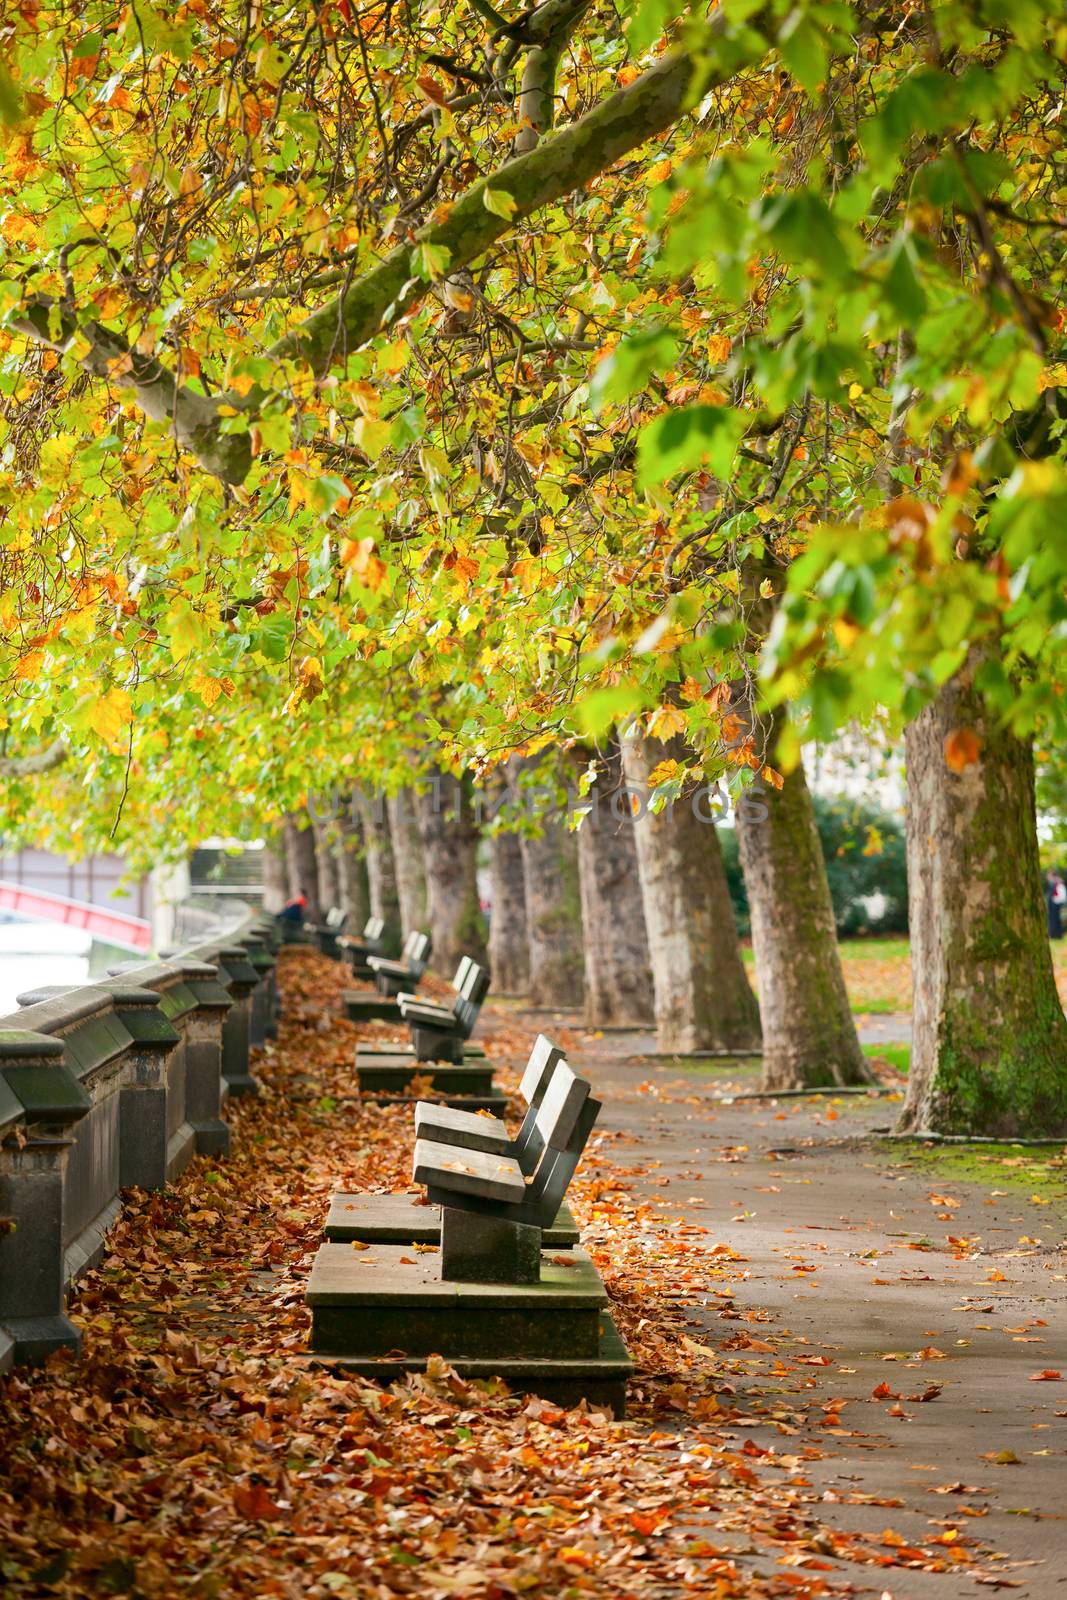 Benches on Thames Embankment by naumoid